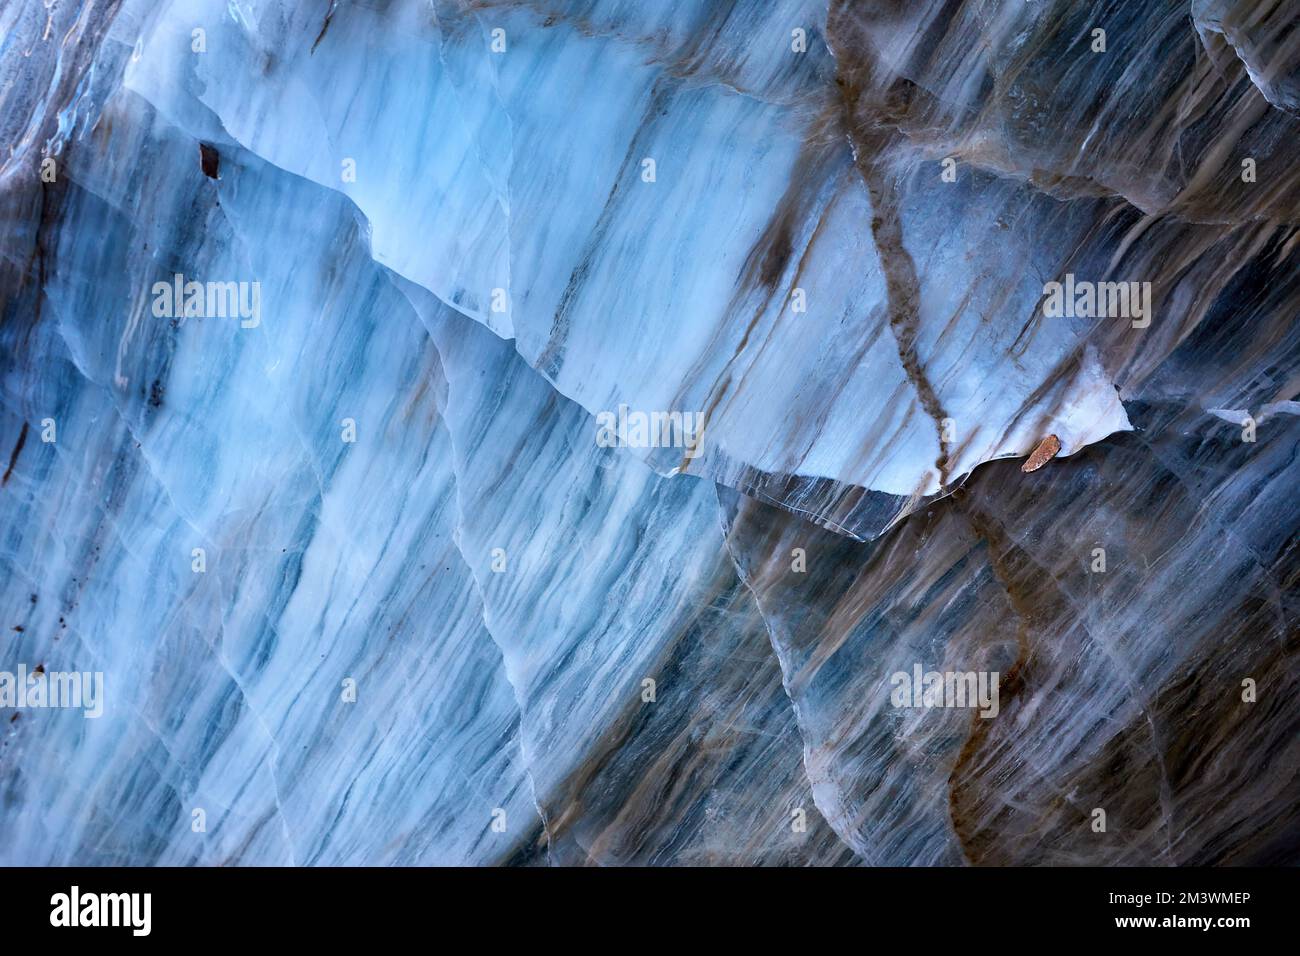 Beautiful landscape of Blue ice cave wall texture at mountains against blue sky in Almaty, Kazakhstan Stock Photo